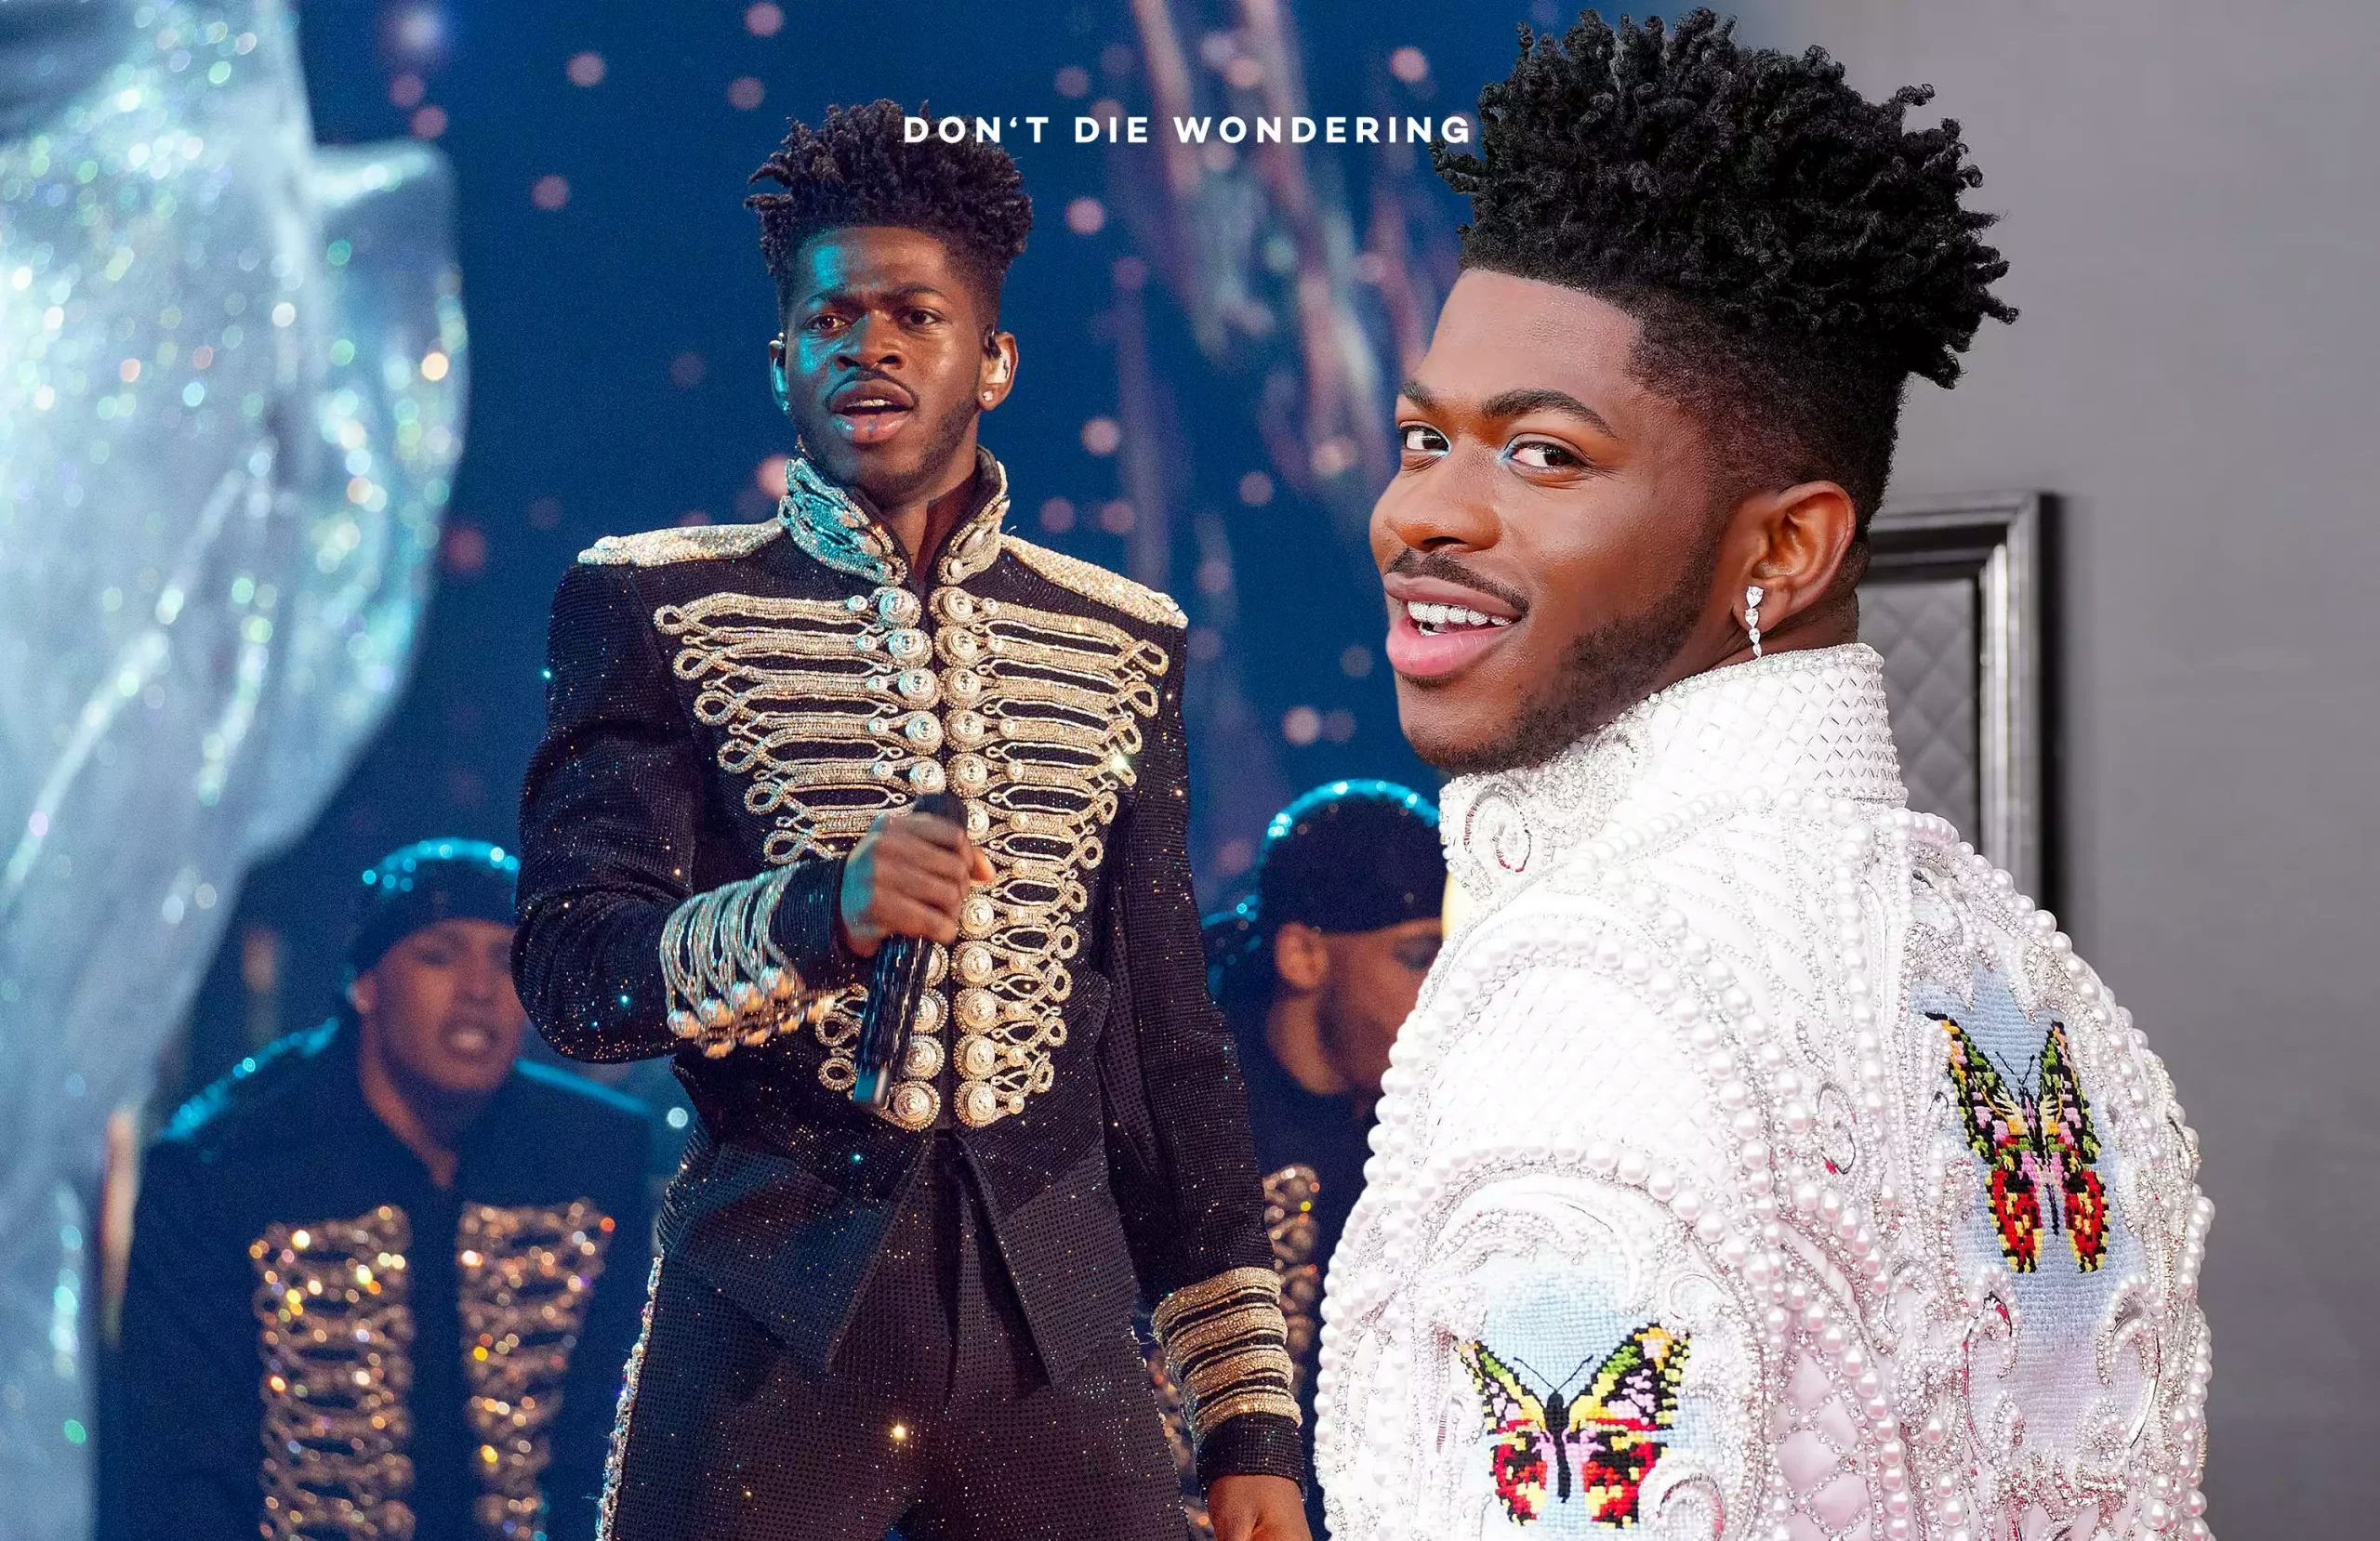 Lil Nas X to be honoured at 2022 songwriters hall of fame gala